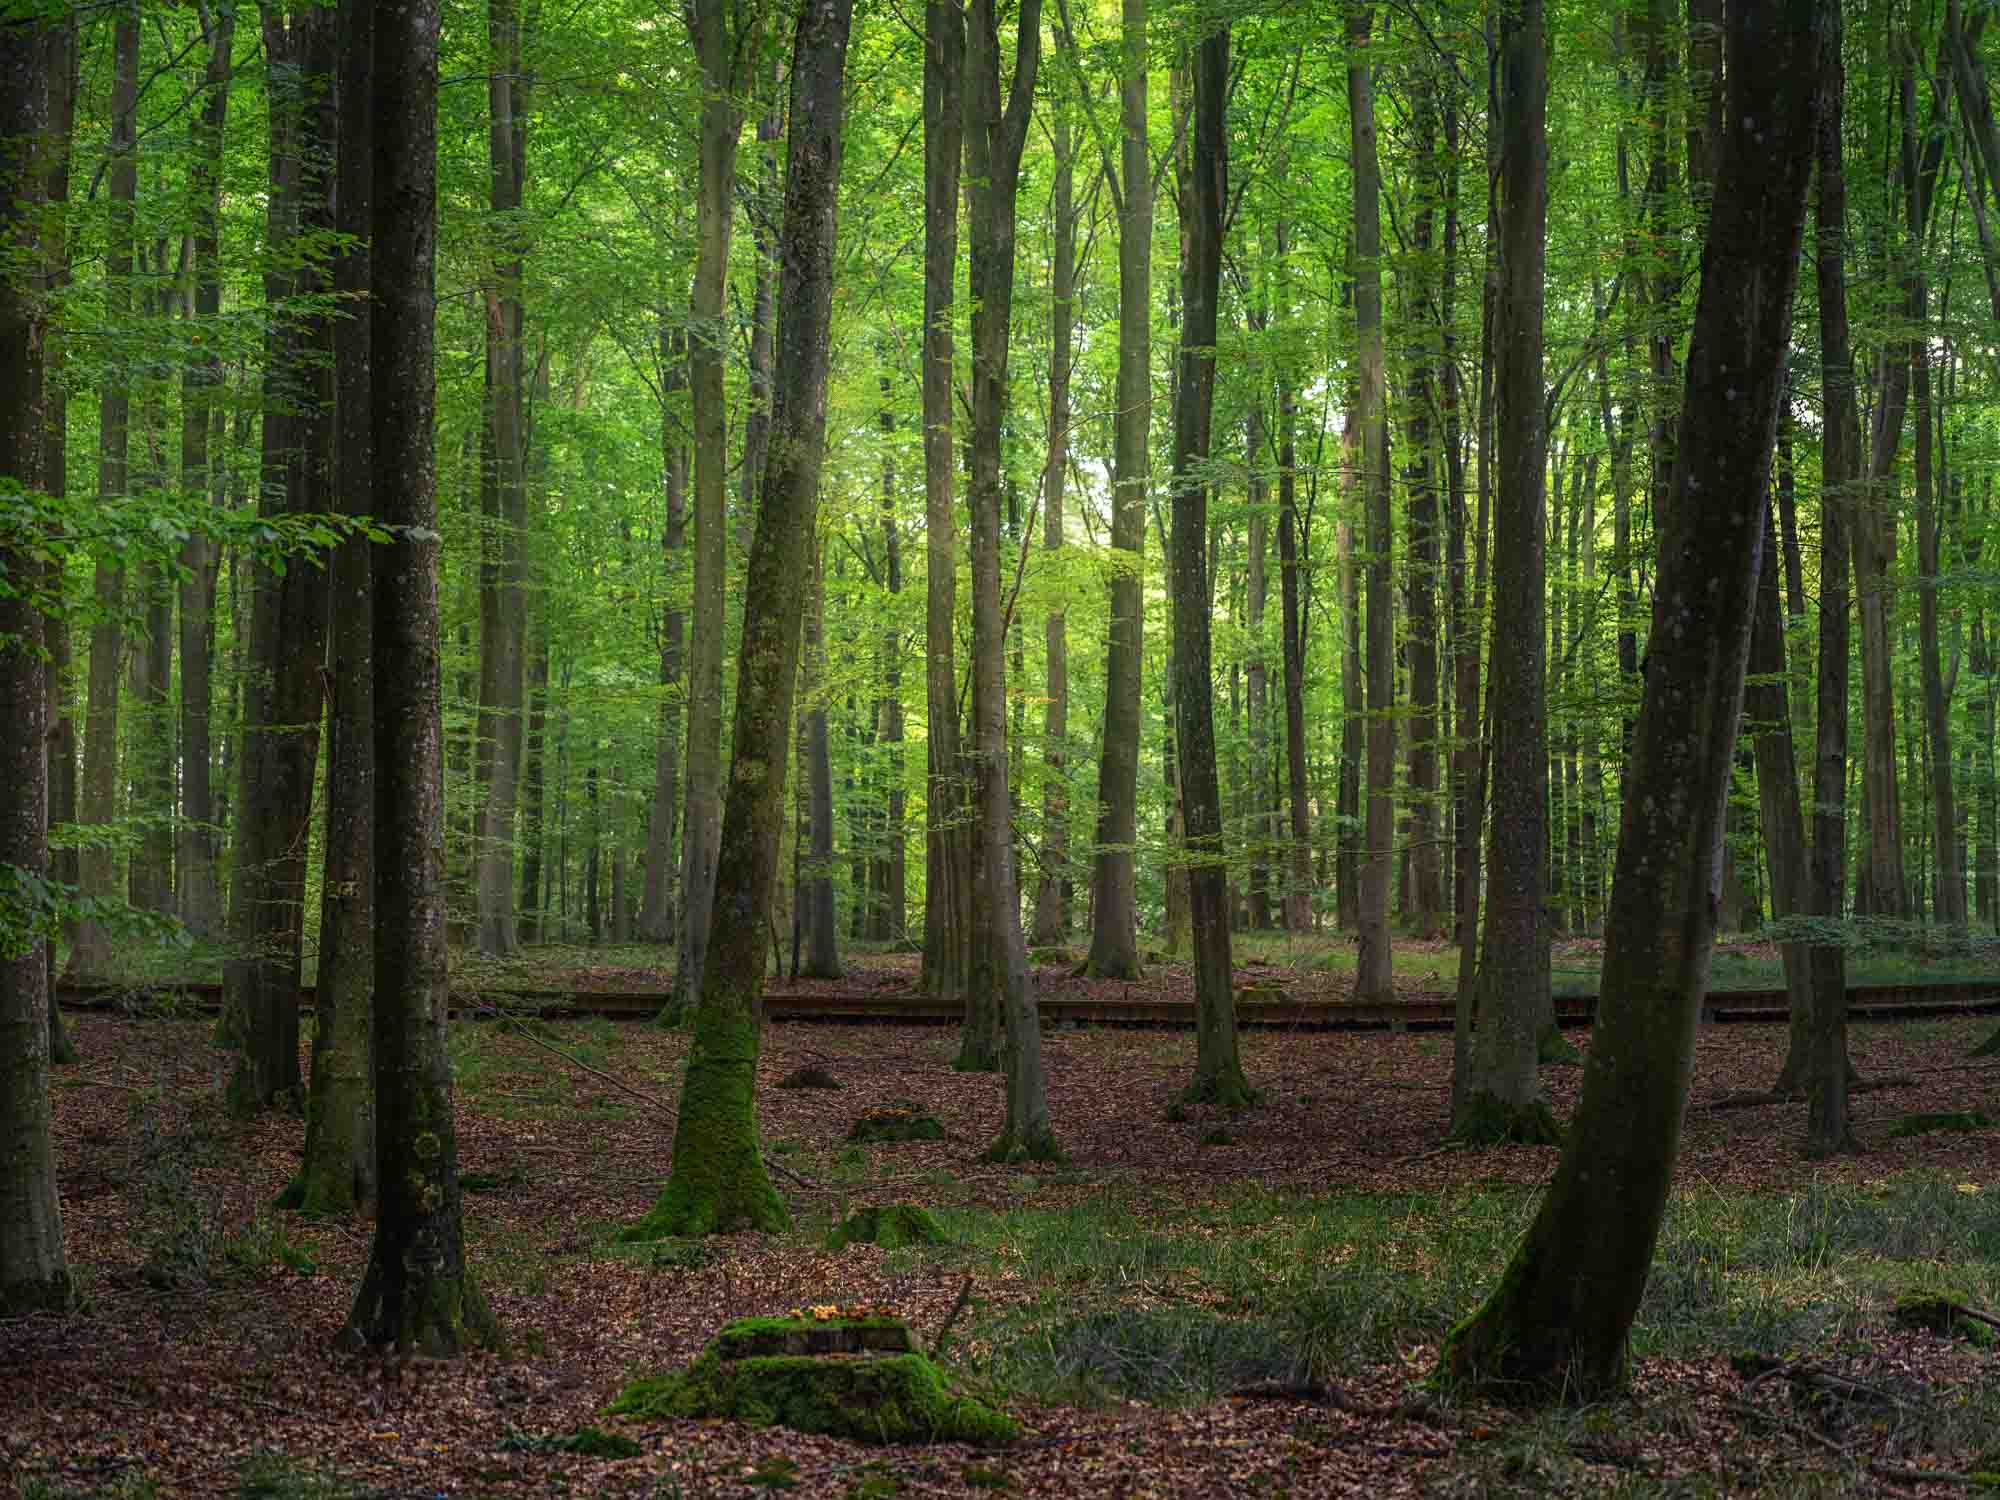 A serene forest with sunlight filtering through the canopy, highlighting the greenery and the peacefulness of the woodland near Copenhagen's Forest Tower.